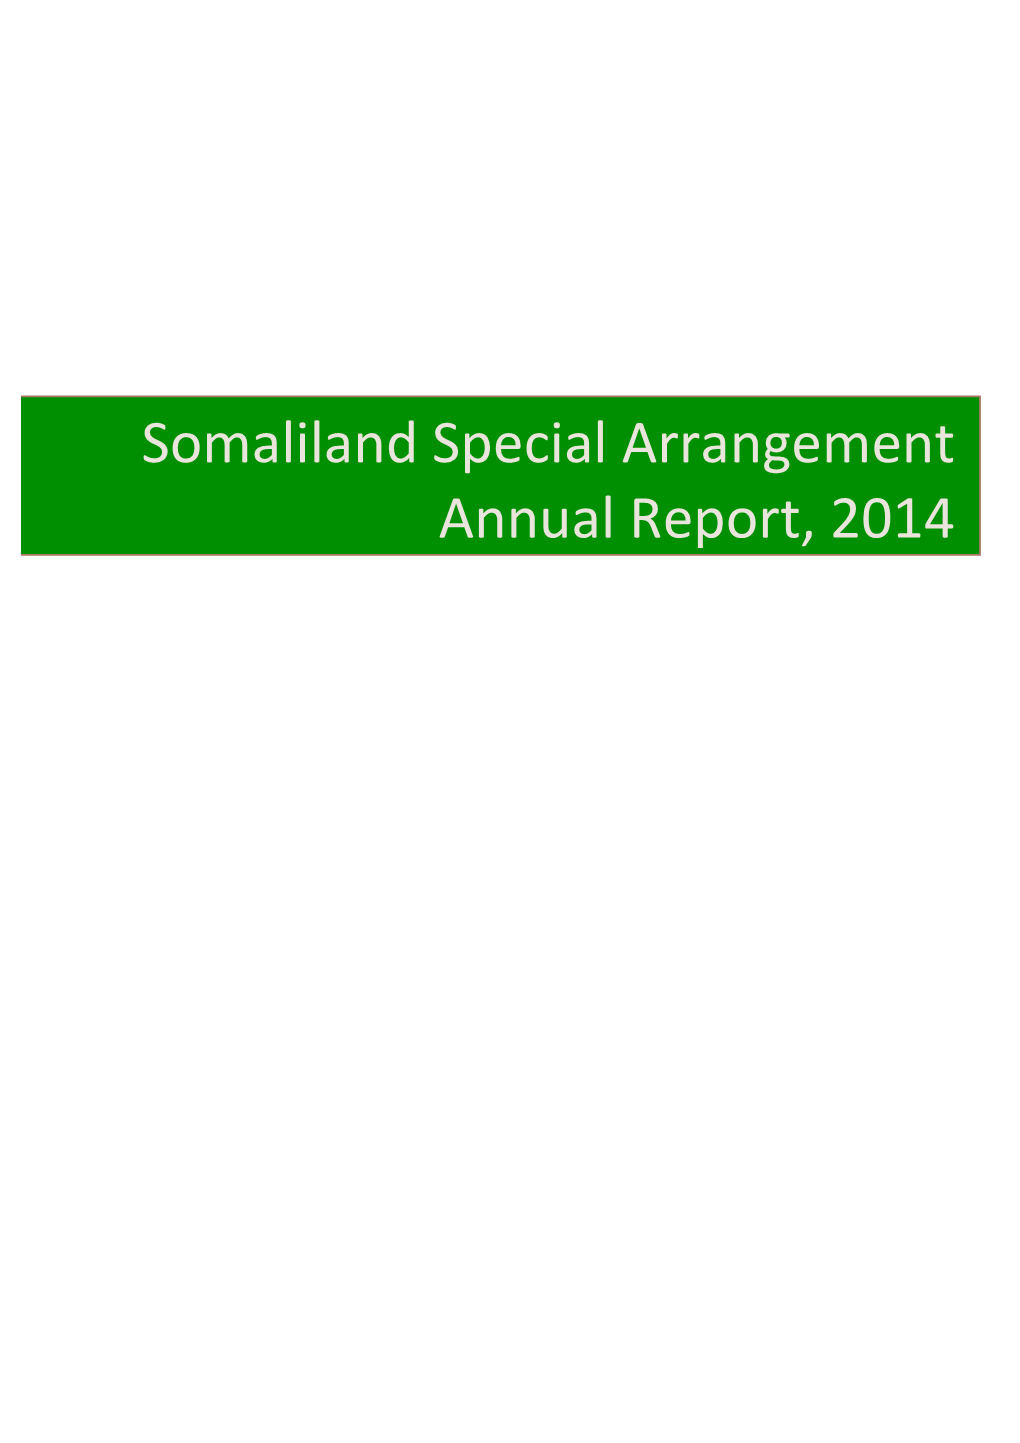 Somaliland Special Arrangement Annual Report, 2014